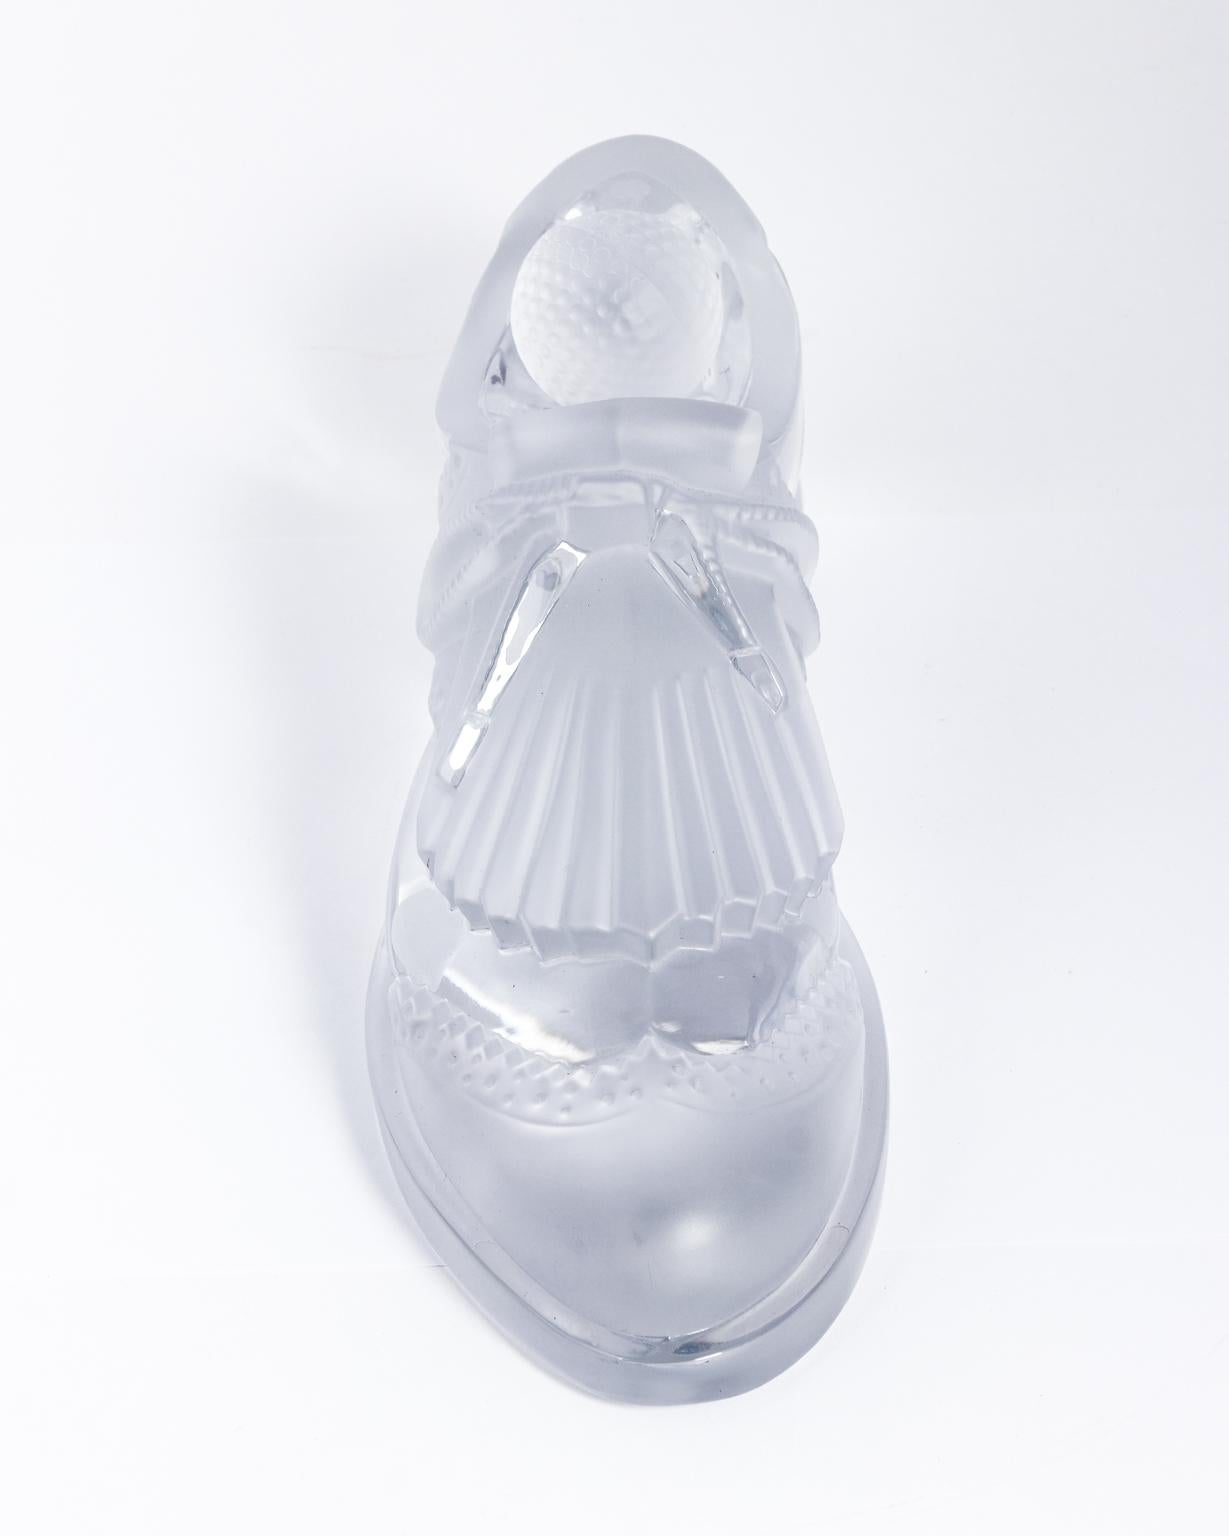 Crystal Golf Shoe and Bell by Royales De Champagne 4